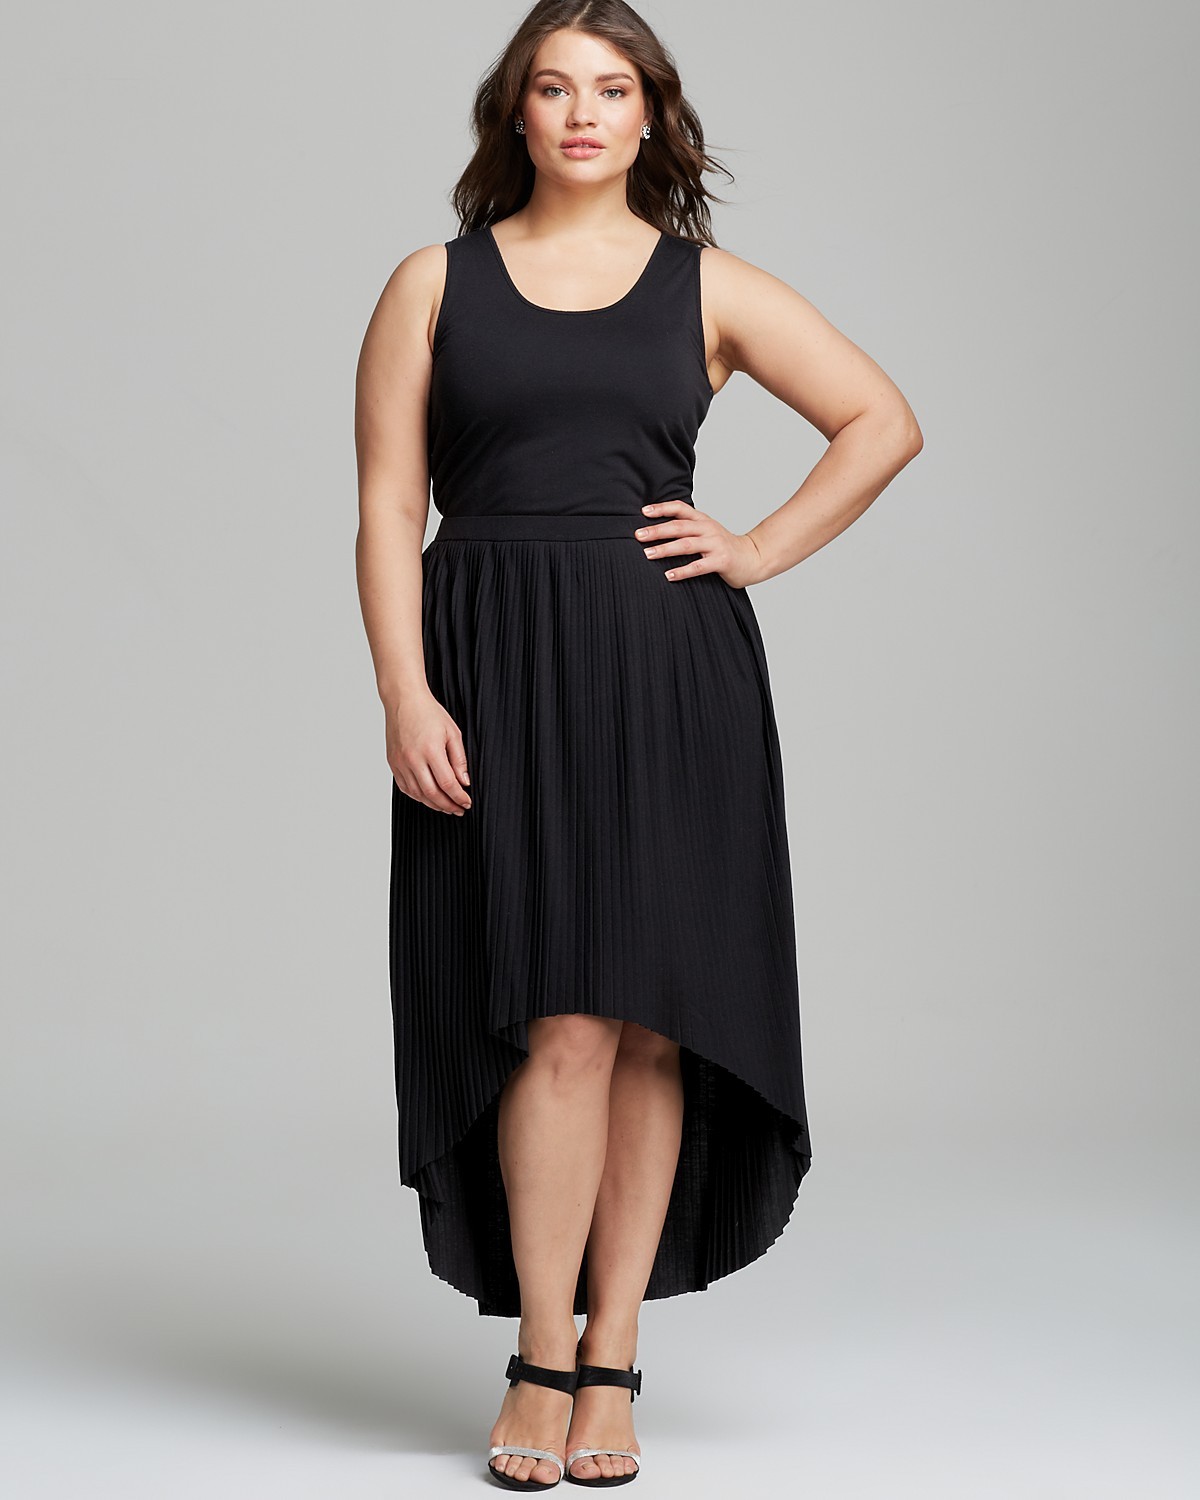 curveappeal:  Tara Lynn for Bloomingdales  38 inch bust, 34 inch waist, 46 inch hips